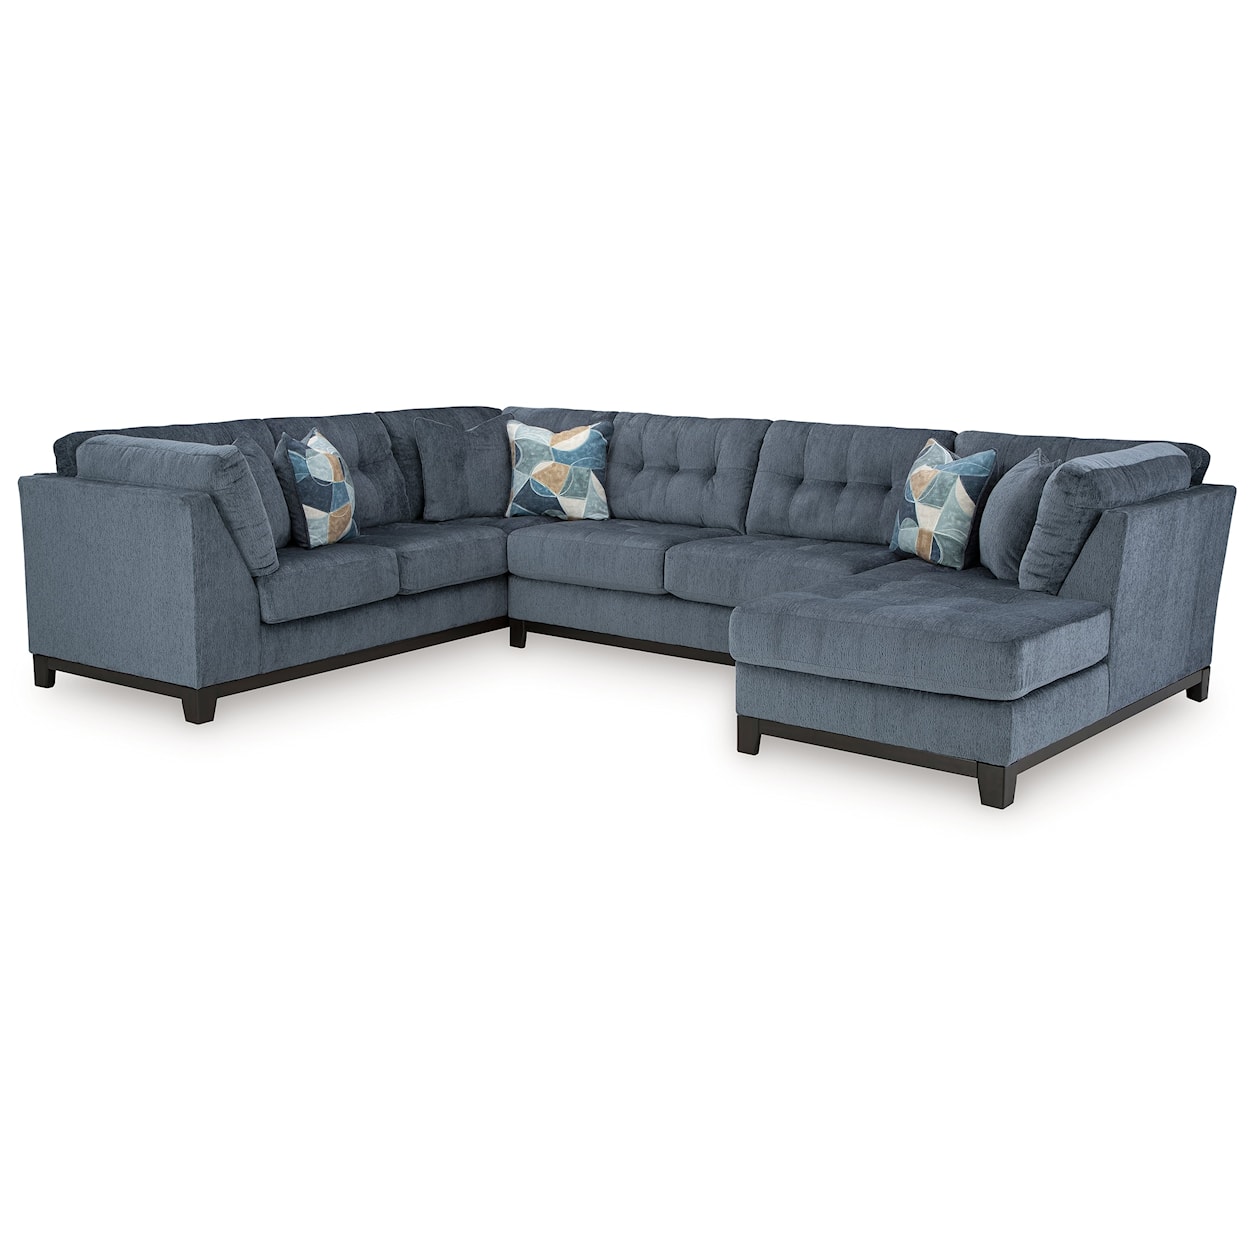 Ashley Furniture Benchcraft Maxon Place 3-Piece Sectional With Chaise